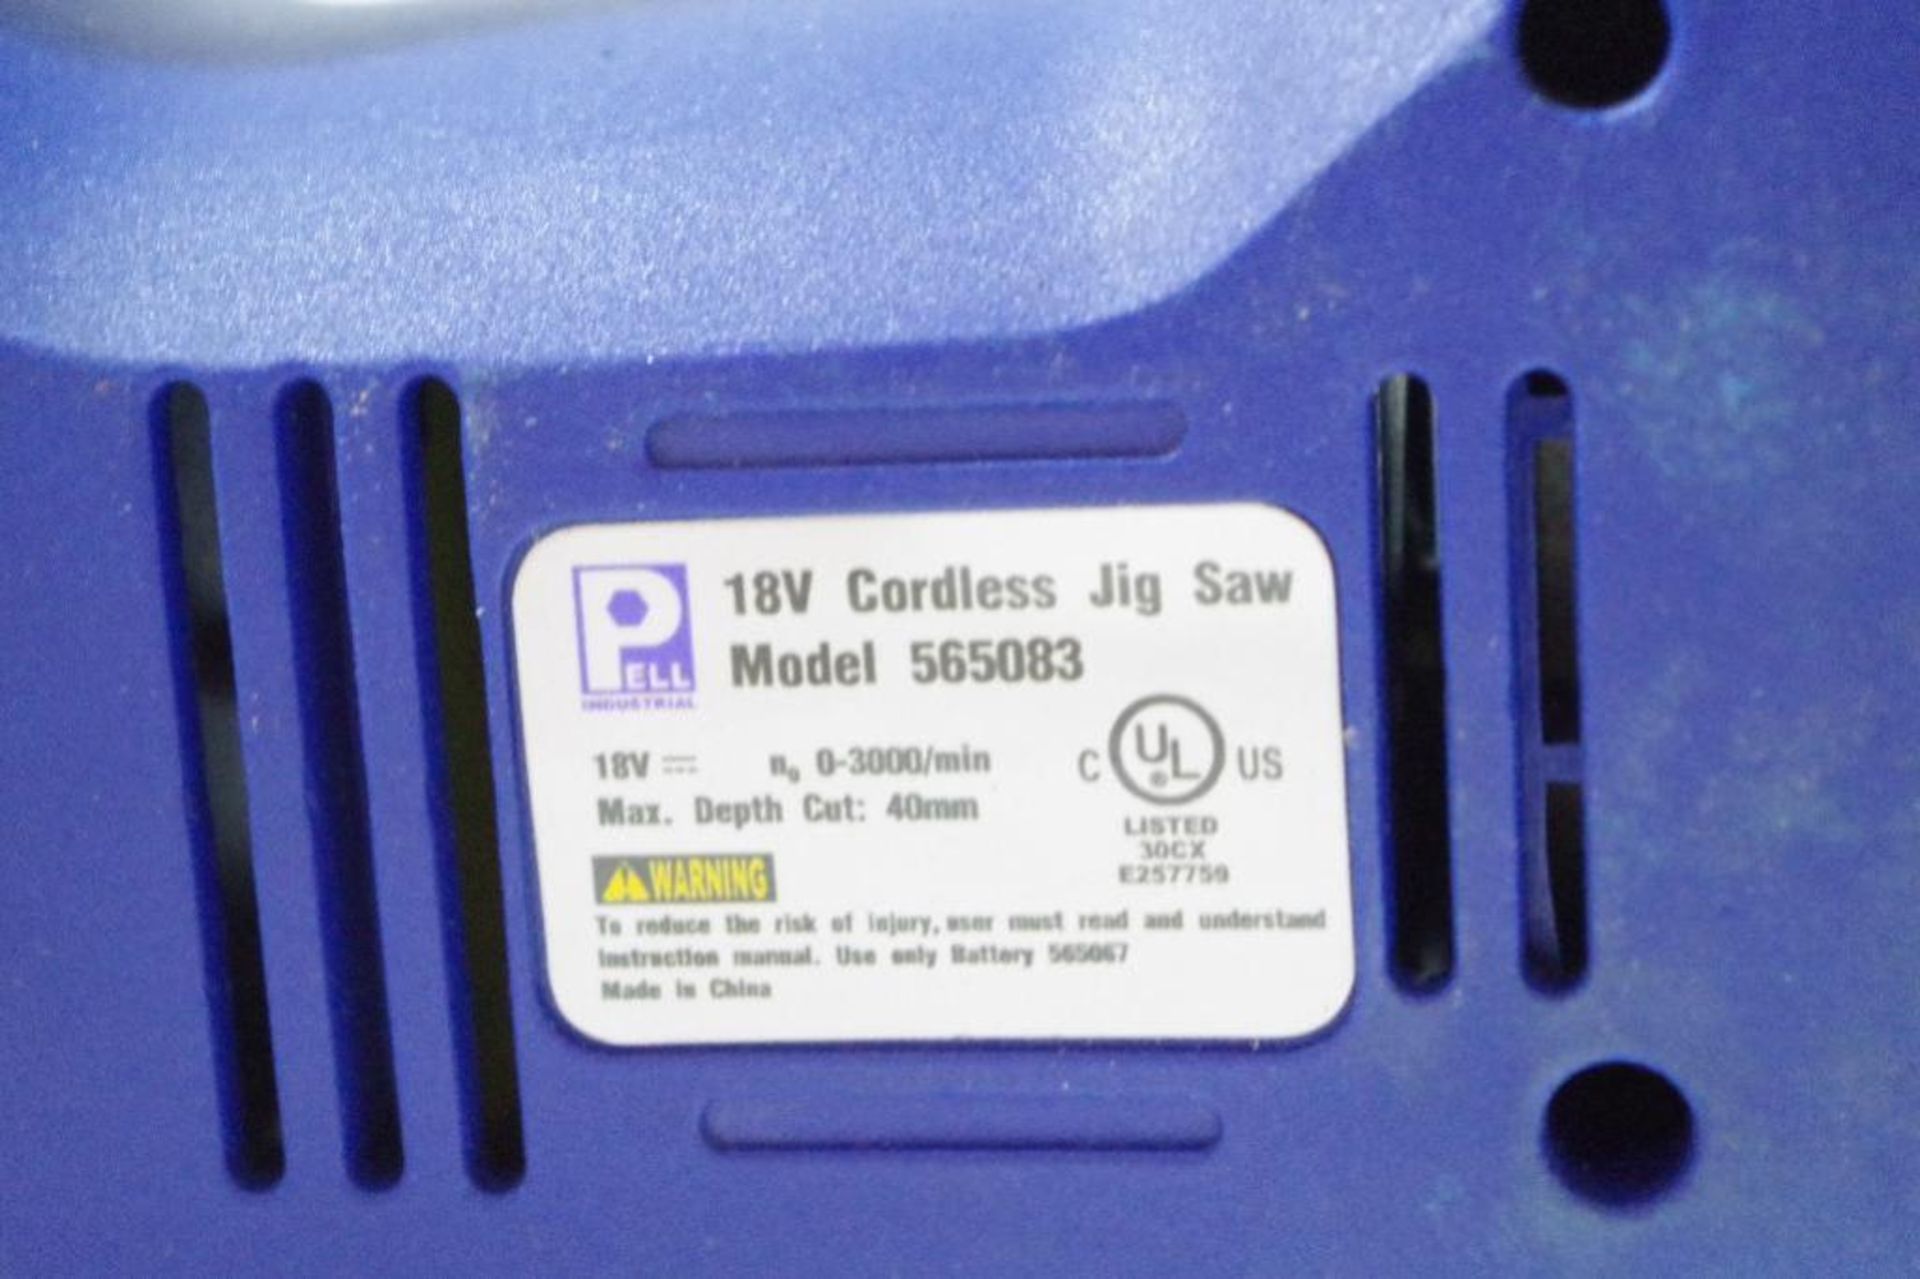 [4] NEW PELL 18V Cordless Jig Saw M/N 565083 (NO Batteries, NO Chargers) - Image 3 of 3